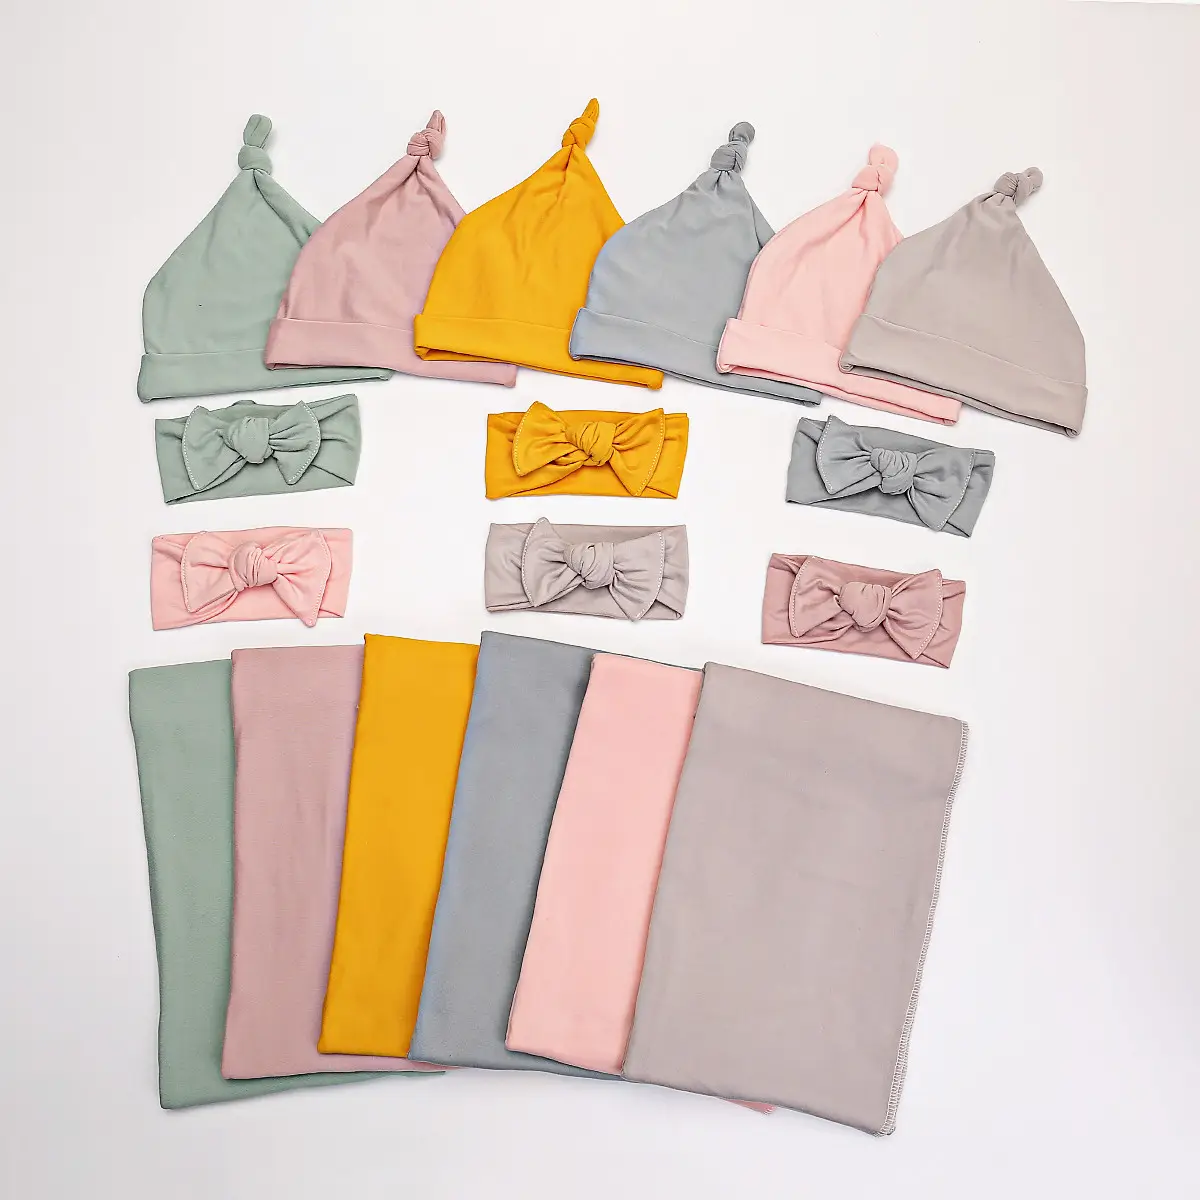 Soft Cotton Solid Color Plain Design Newborn Baby Swaddle Wrap Blanket Bedding With Beanie Hat Headband Set